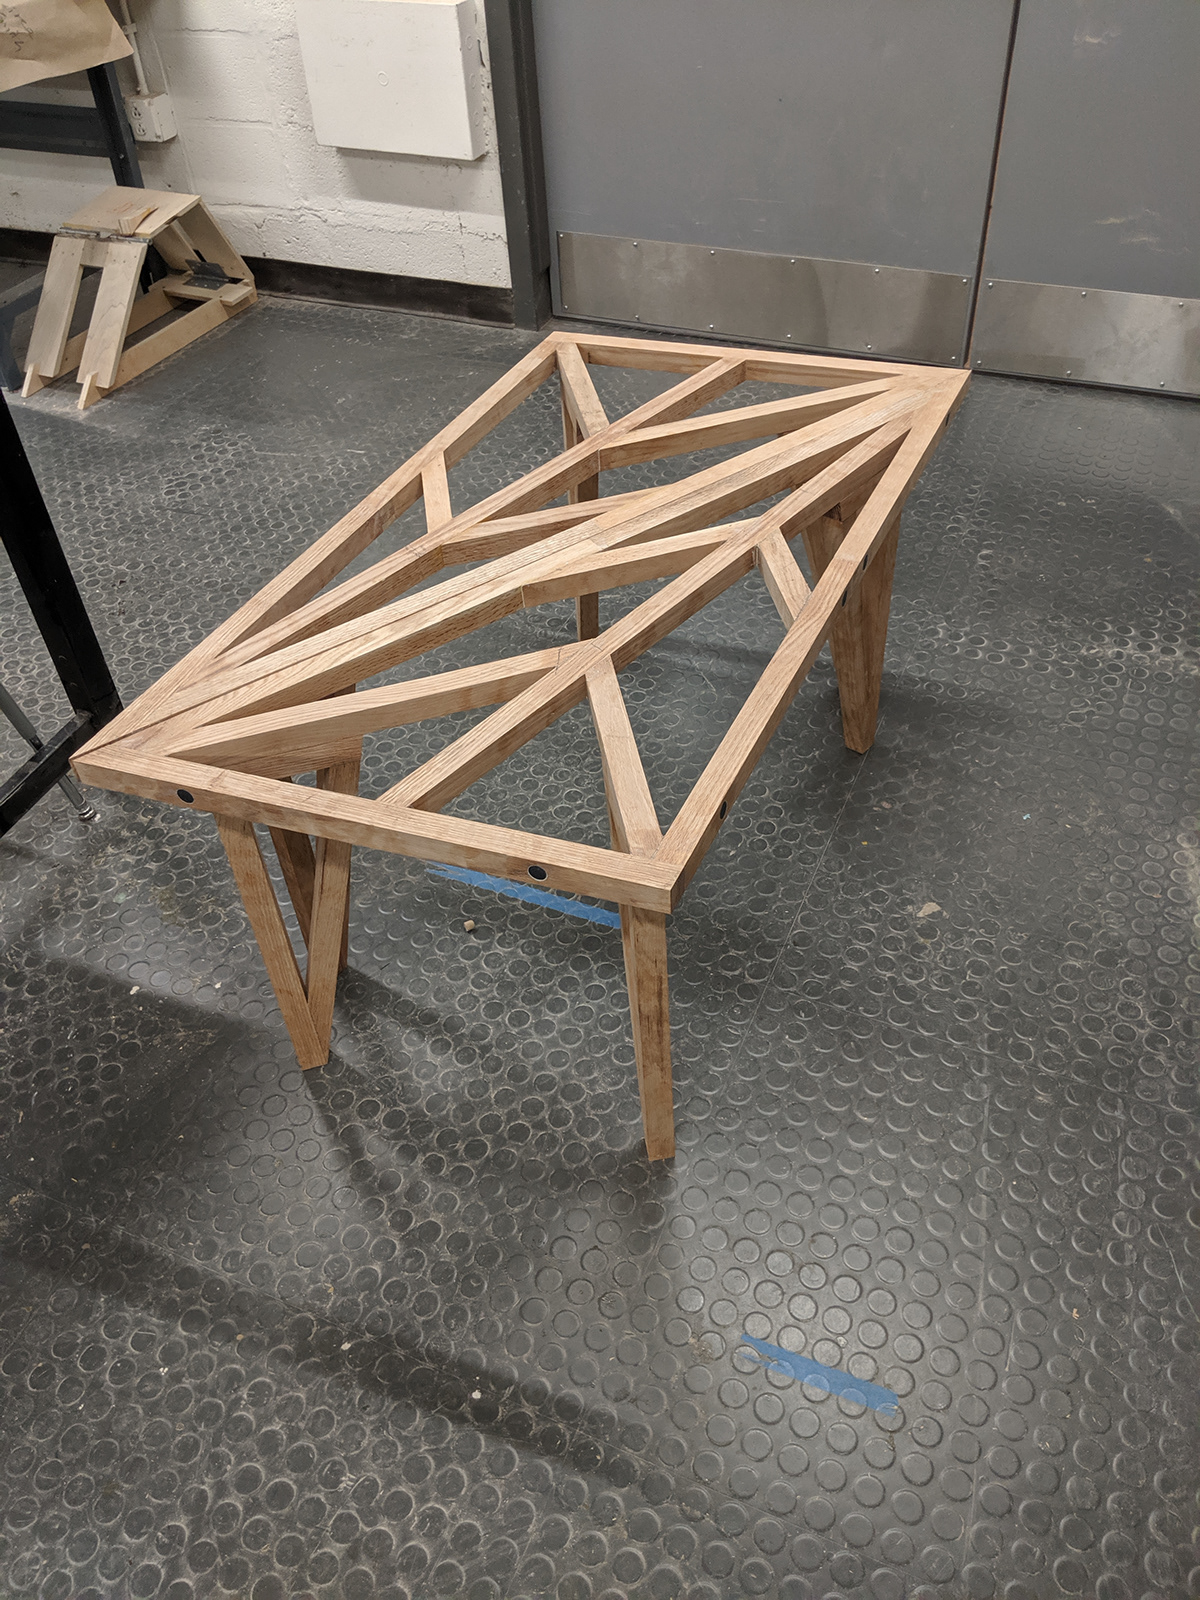 acrylic Angles Connecting Gemini magnets Multiple Orientations organic table triangle wood